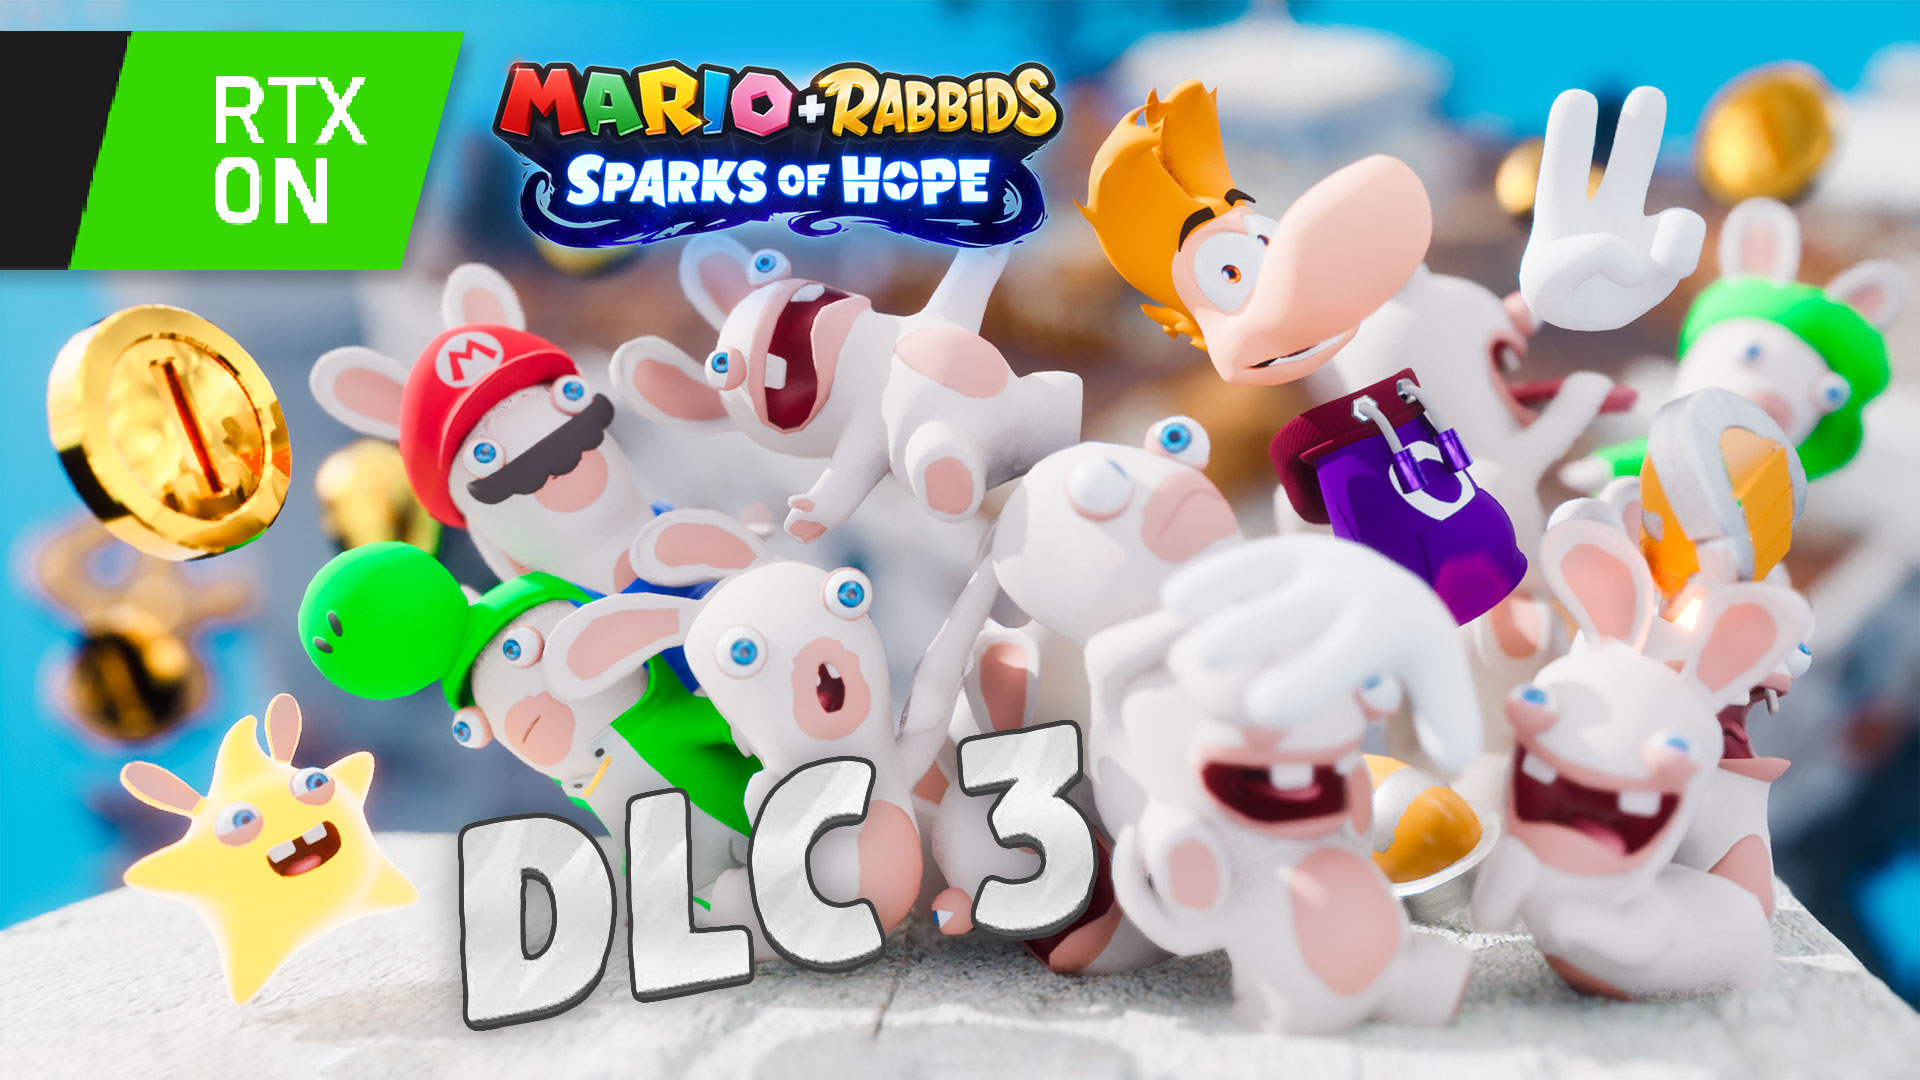 Rayman DLC - Mario + Rabbids Sparks of Hope by Gexe